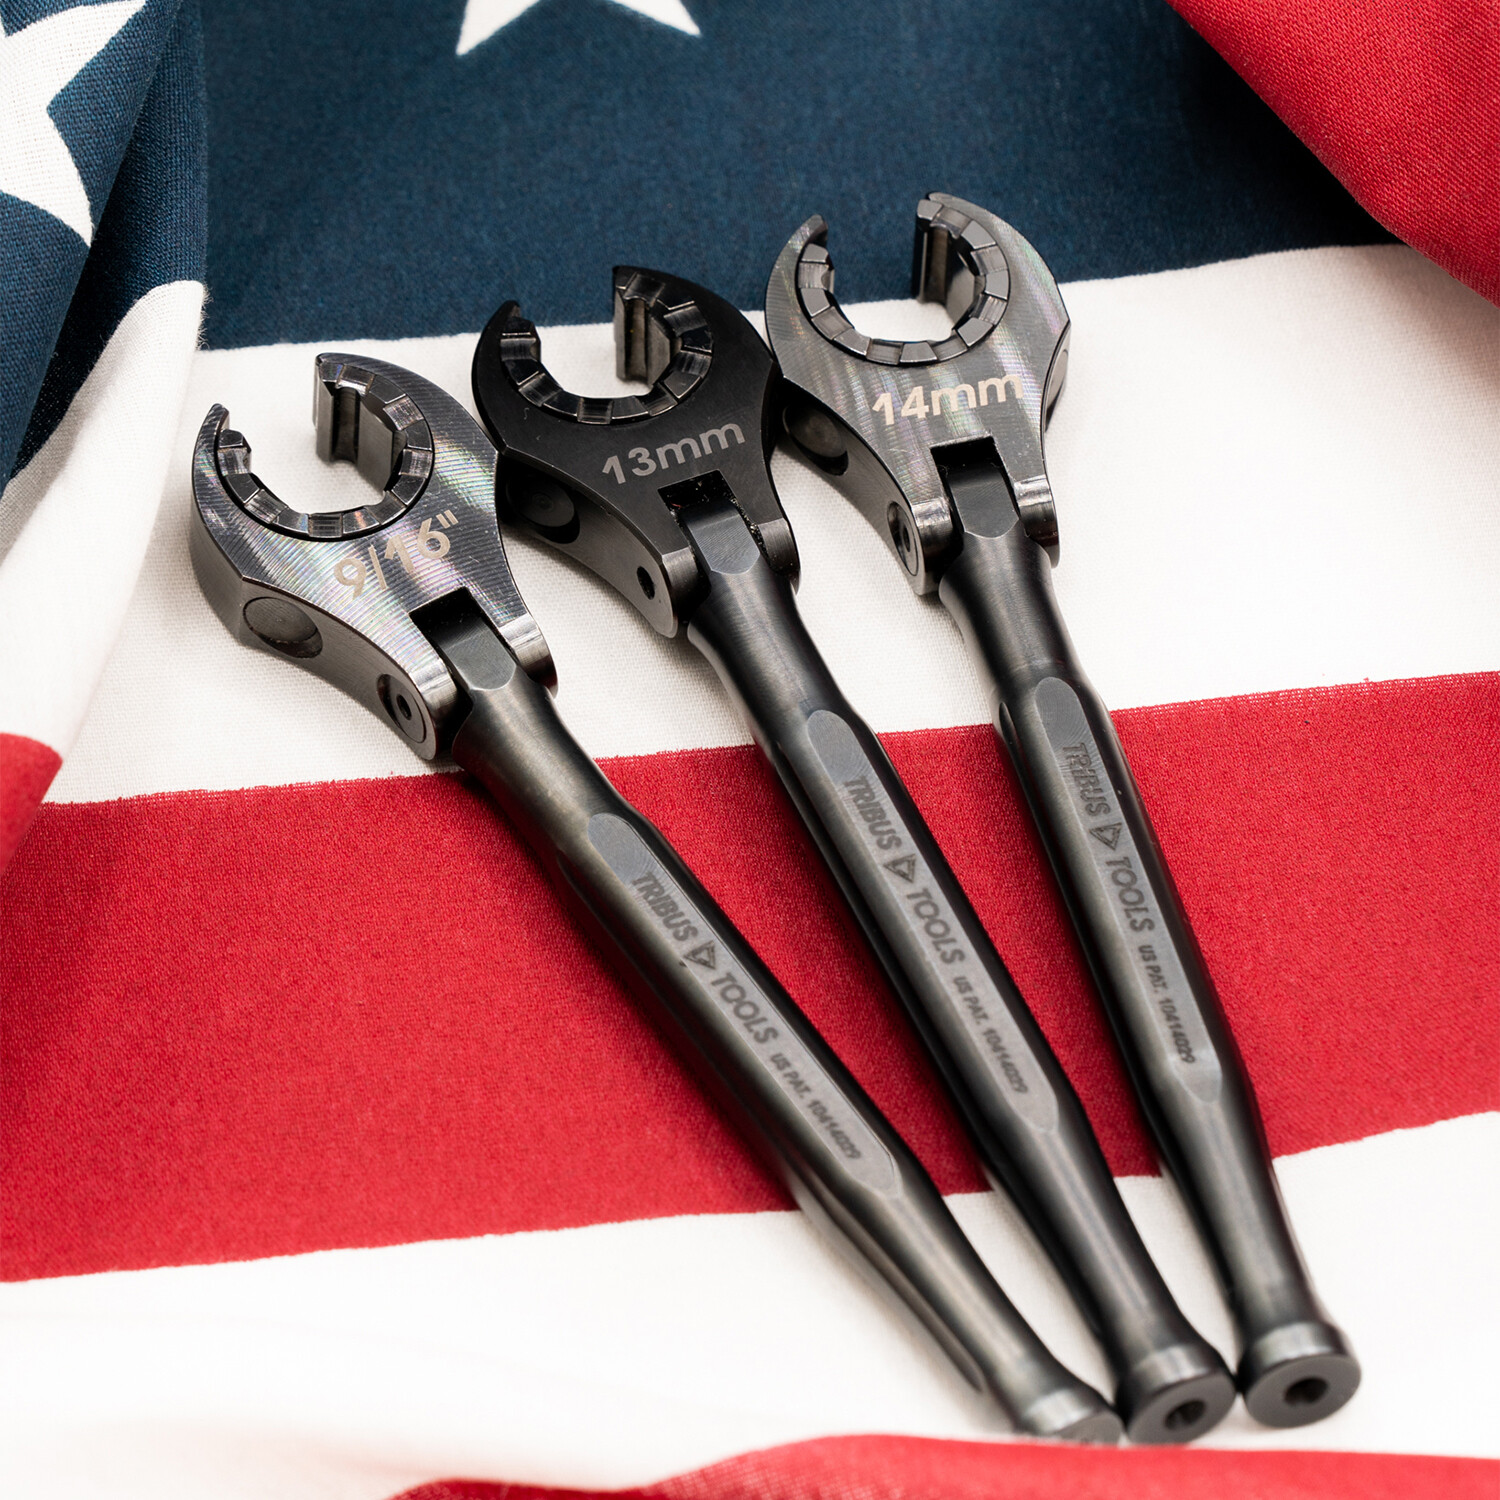 THE LAST WRENCH YOU WILL OWN! SERIOUSLY. by Kendall Bertagnole — Kickstarter